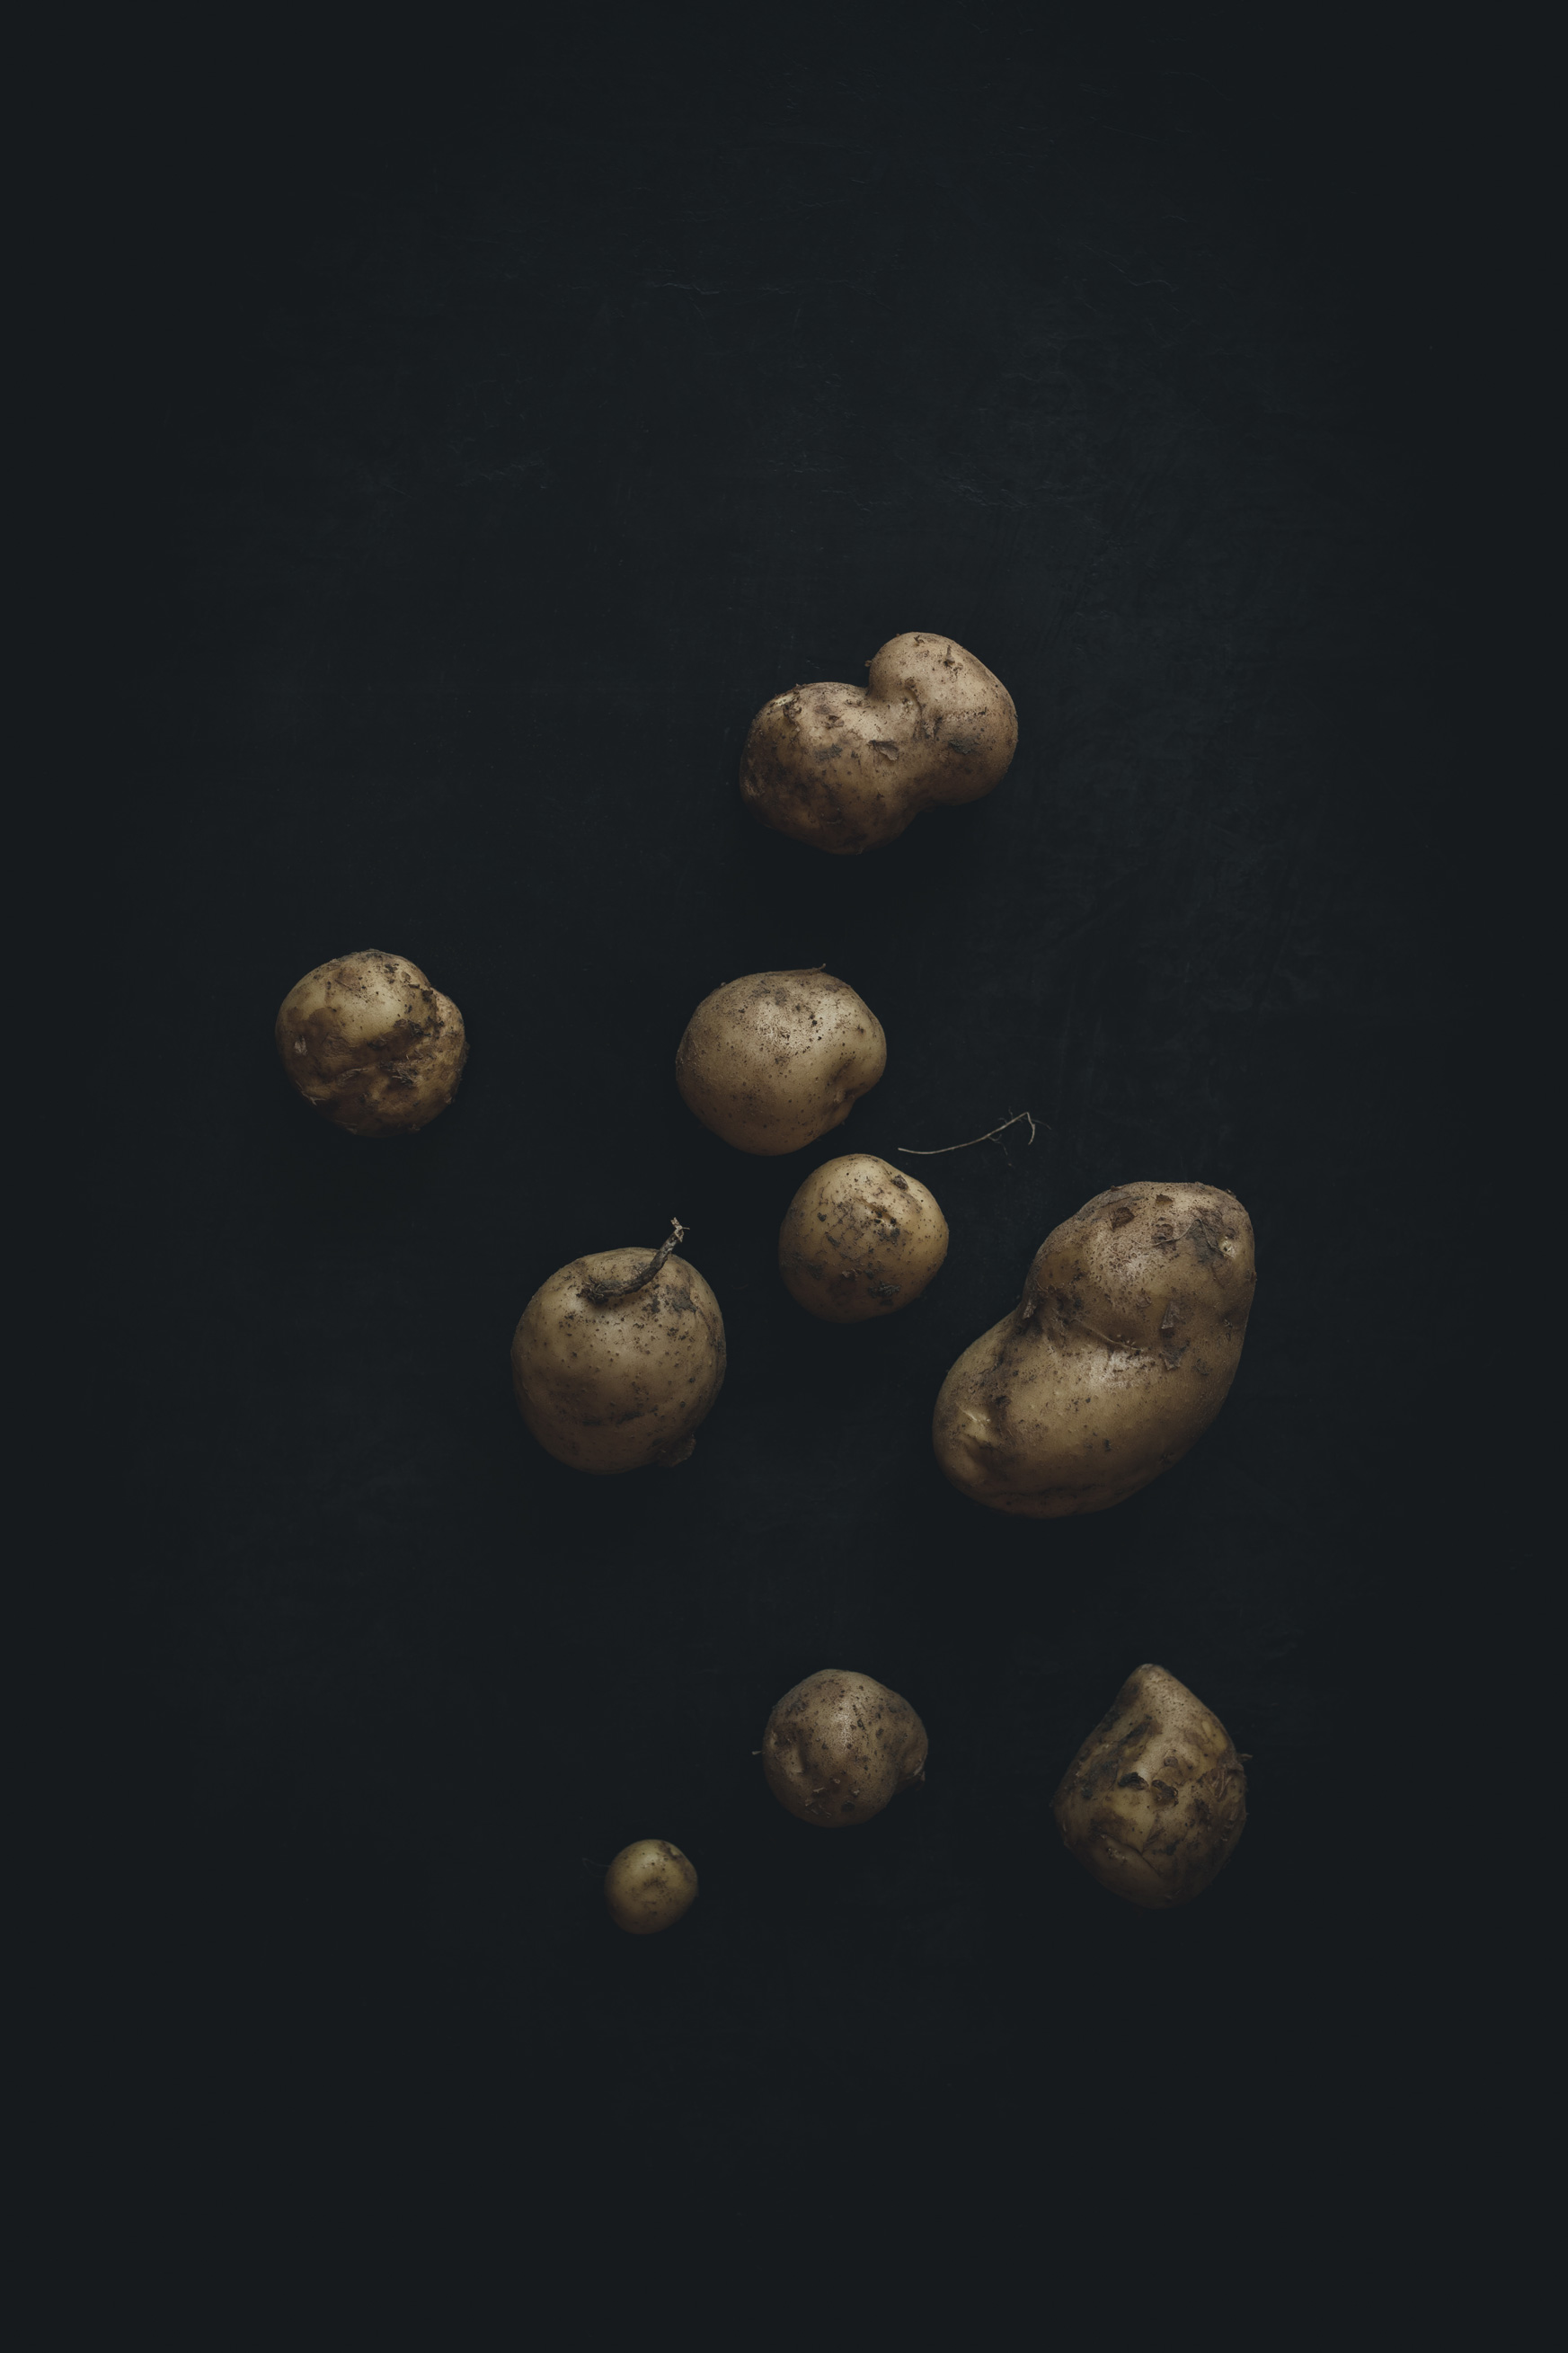 Potatoes on a black background from the Moody Food series by John Robson Photography